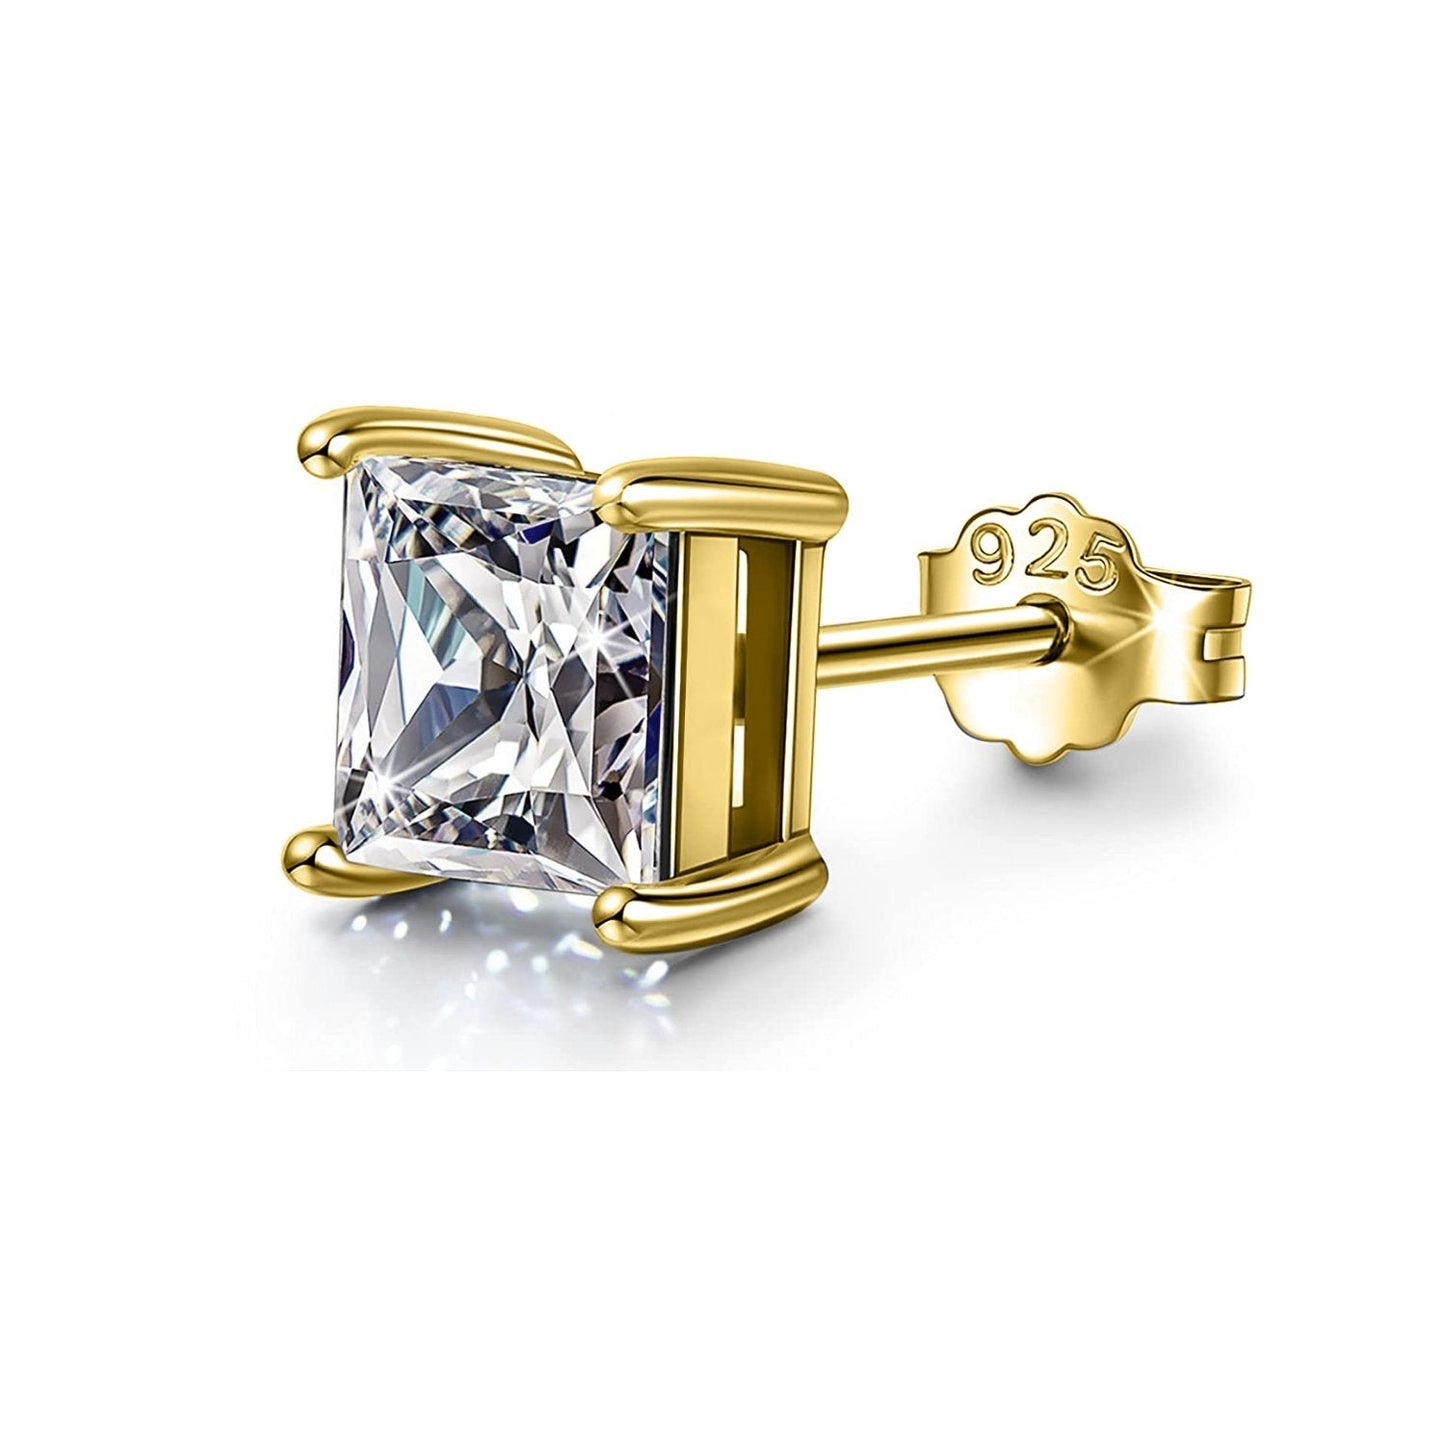 Mens Gold Square Solitaire Earring embellished with Swarovski Zirconia - 92.5 Silver in 18K Gold Finish